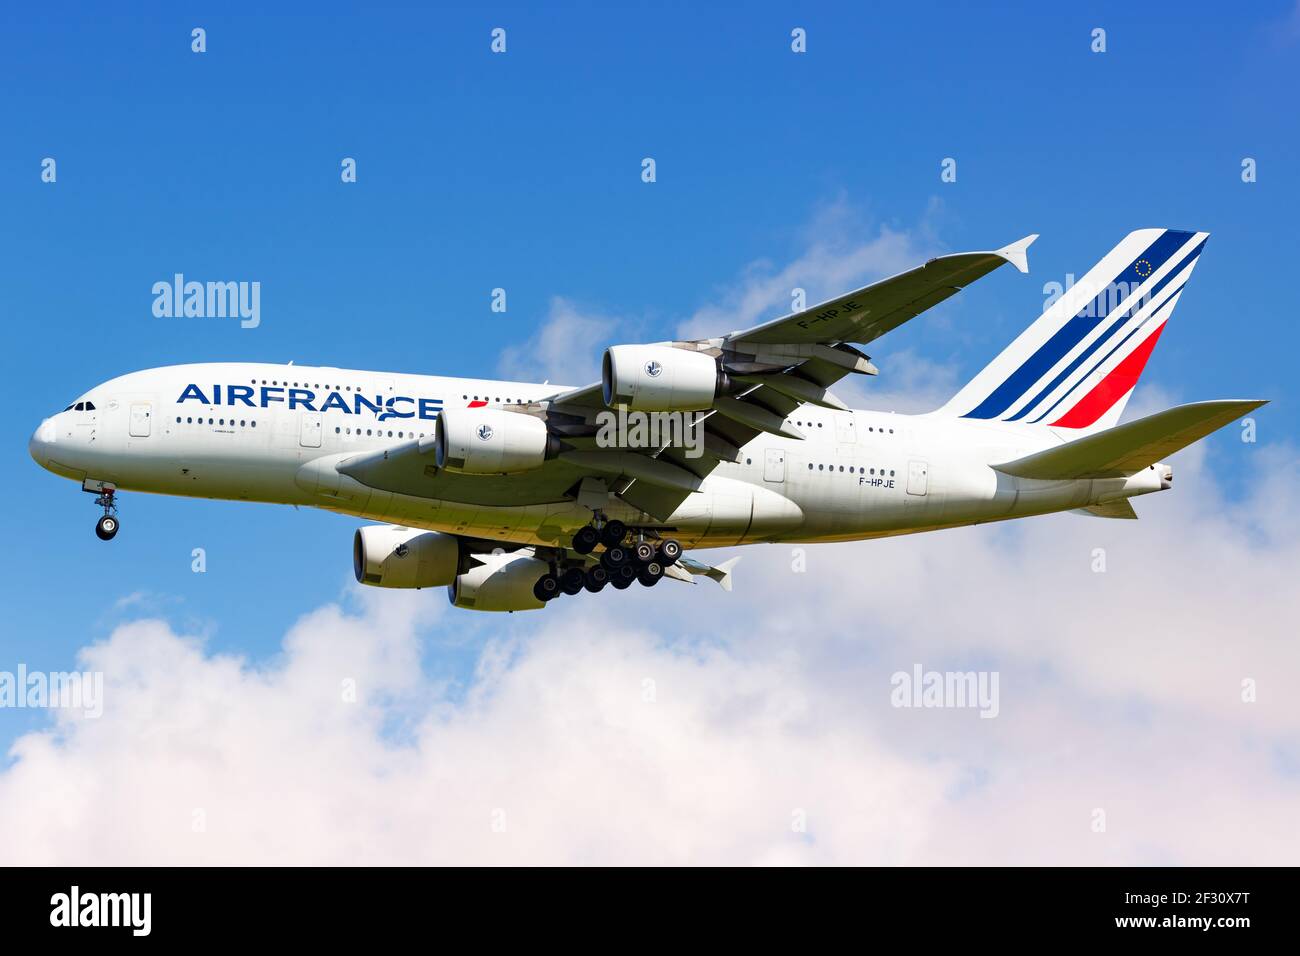 Paris, France - August 17, 2018: Air France Airbus A380 airplane at Paris Charles de Gaulle airport in France. Stock Photo